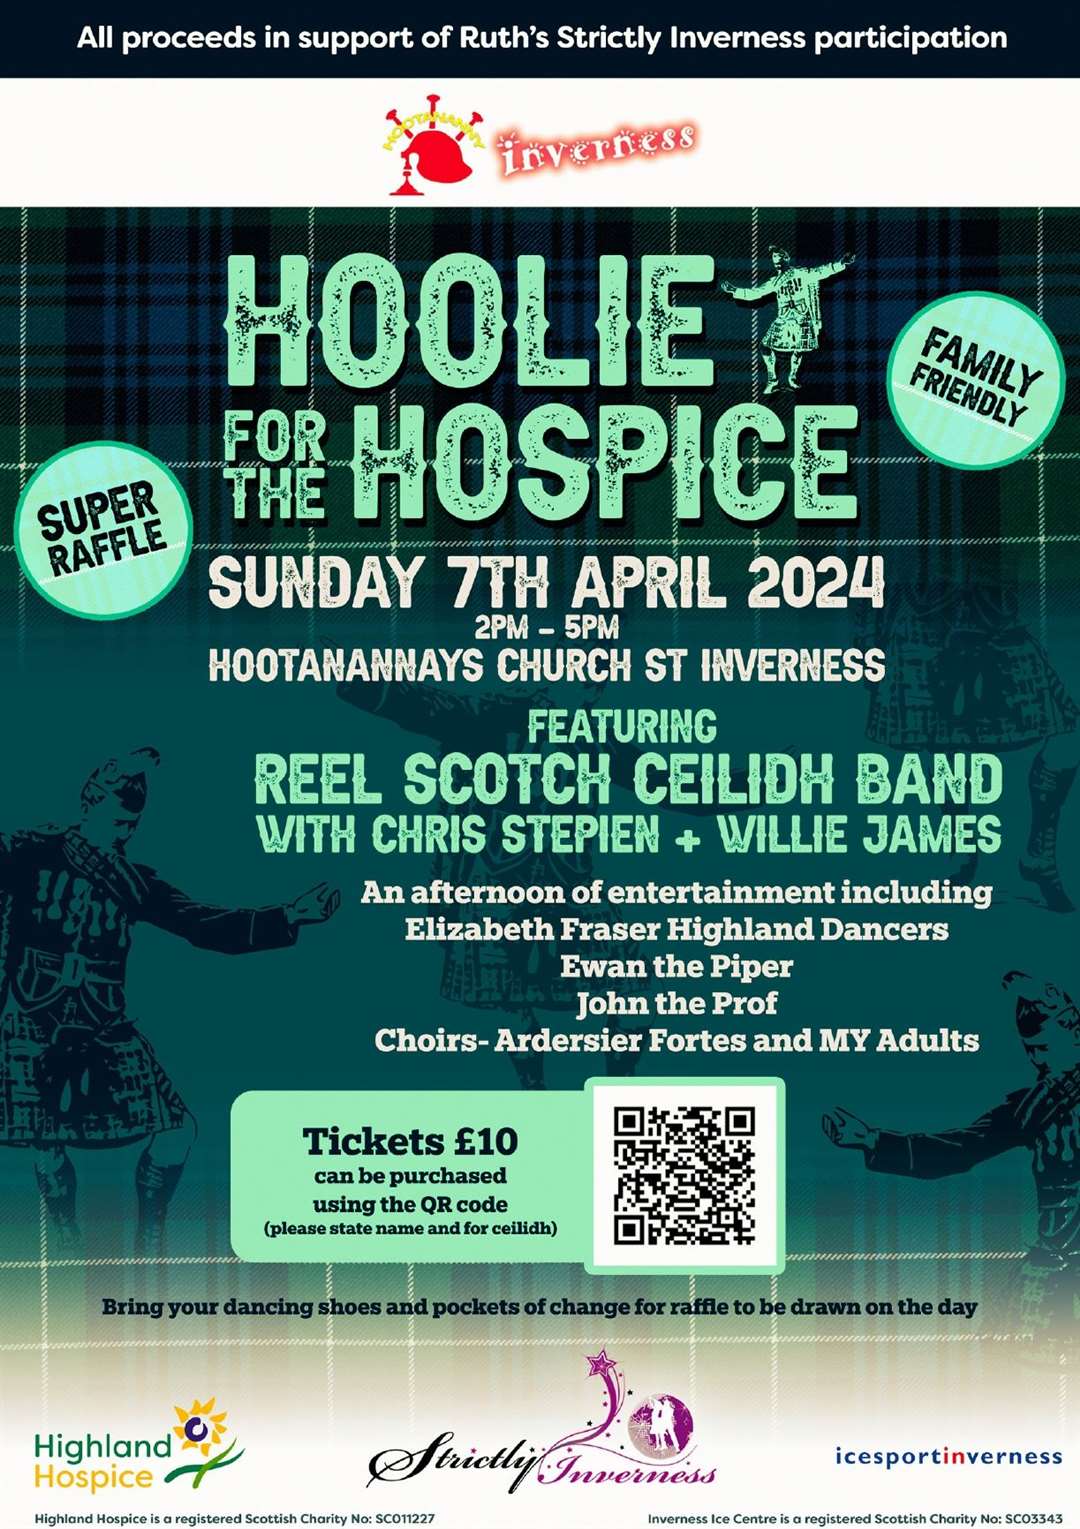 Ruth has planned a ceilidh for tomorrow.